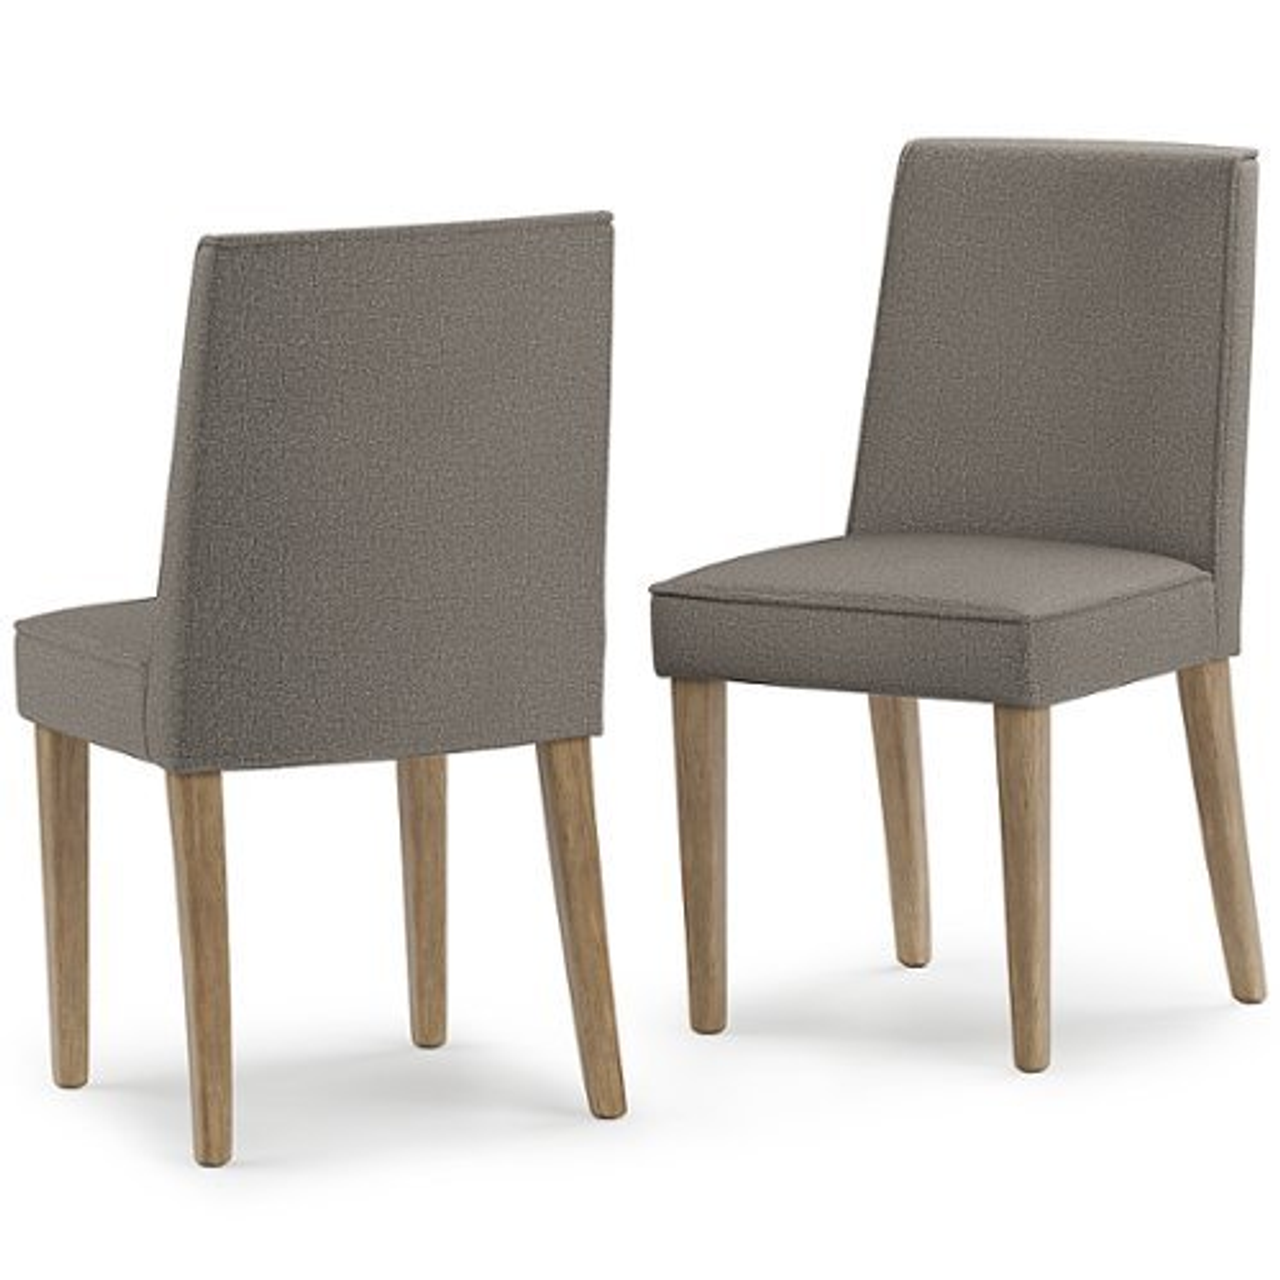 Simpli Home - Bartow Dining Chair ( Set of 2 ) - Taupe